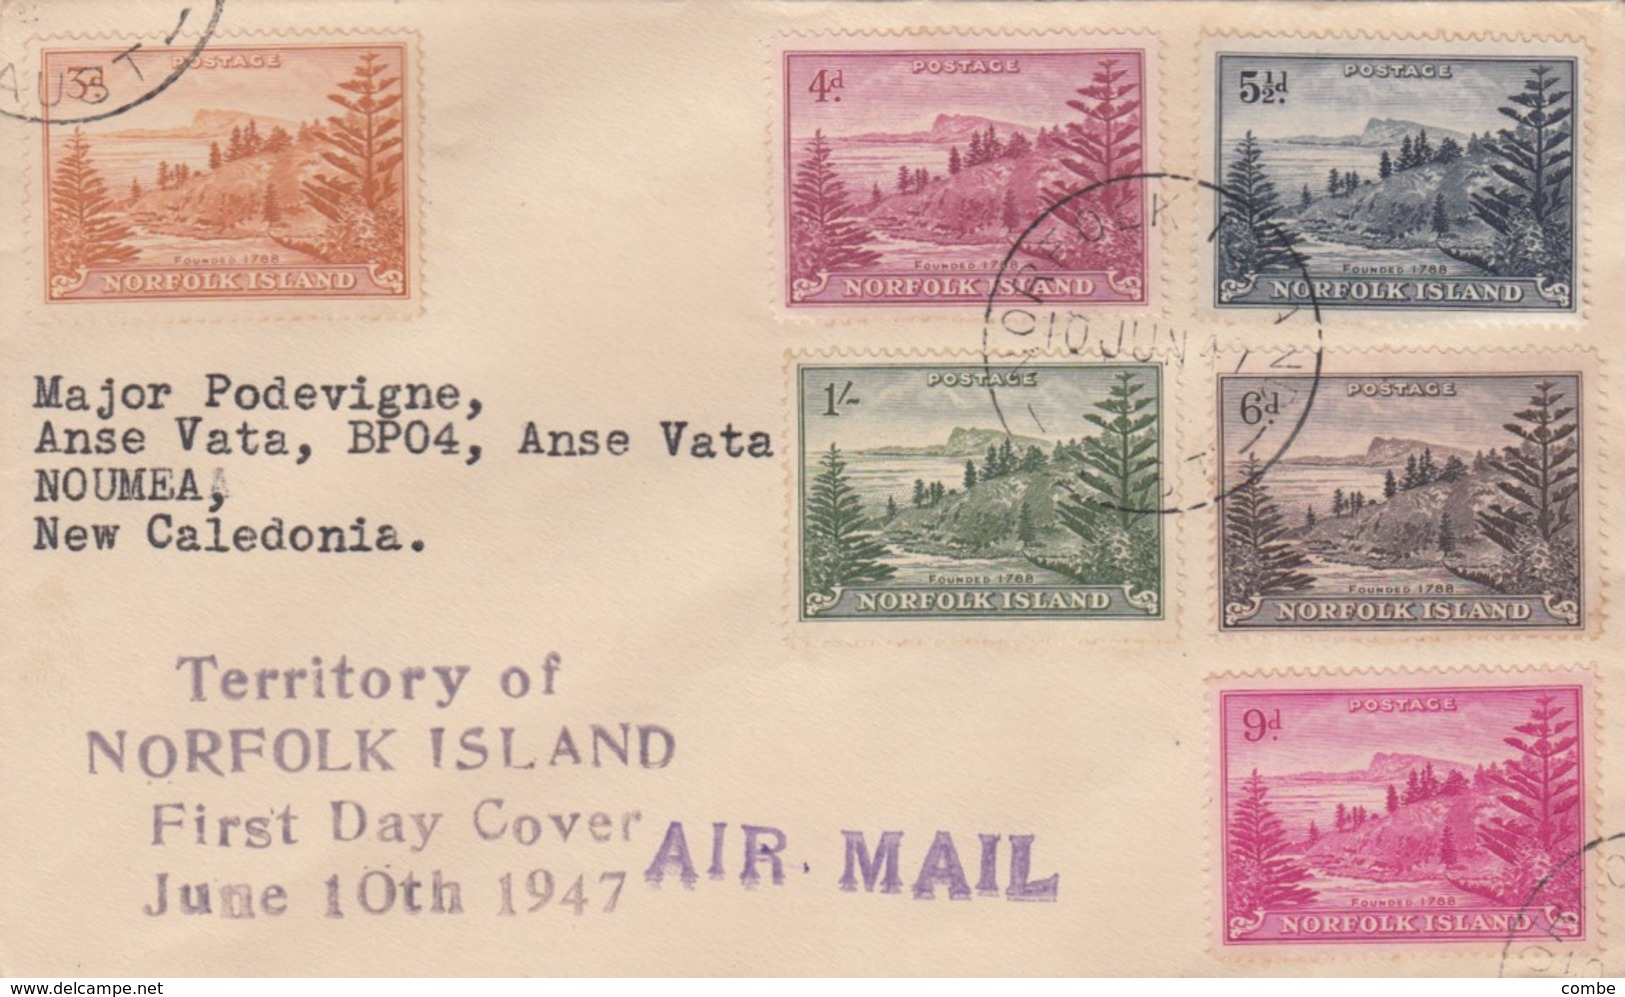 COVER. AIR MAIL. NORFOLK ISLAND. 10 JUN 47. FDC. TO NOUMEA NOUVELLE CALEDONIE - Isla Norfolk